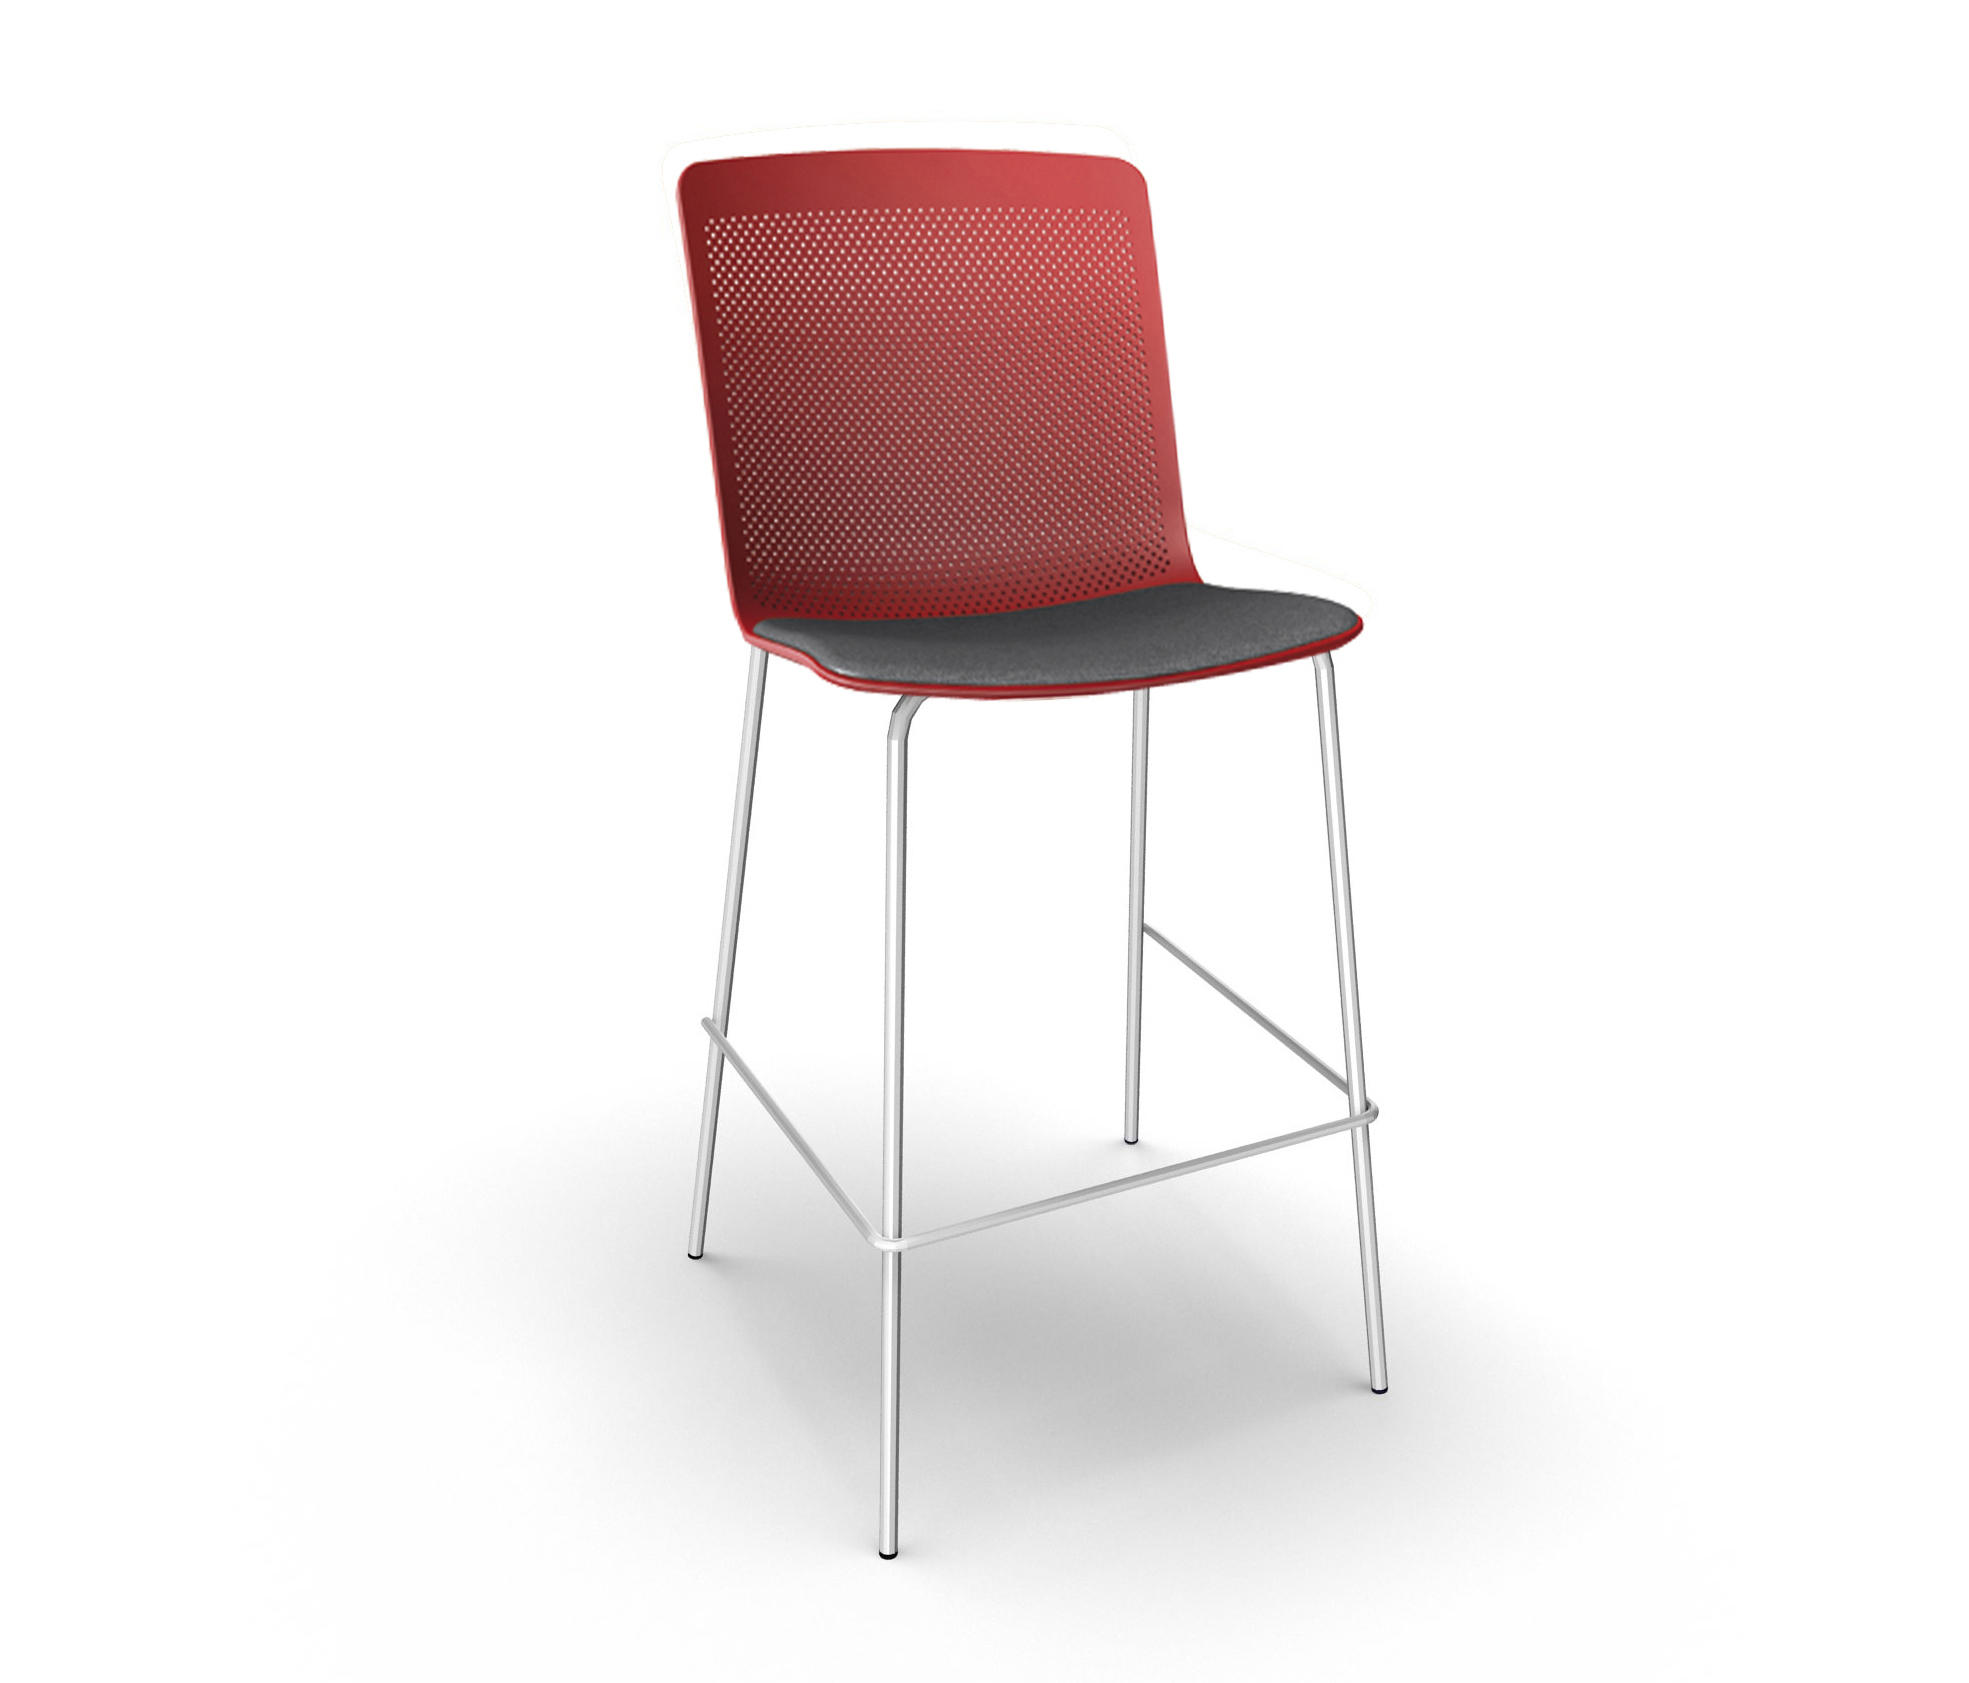 | from Bar GLOVE - Forma stools 5 Architonic